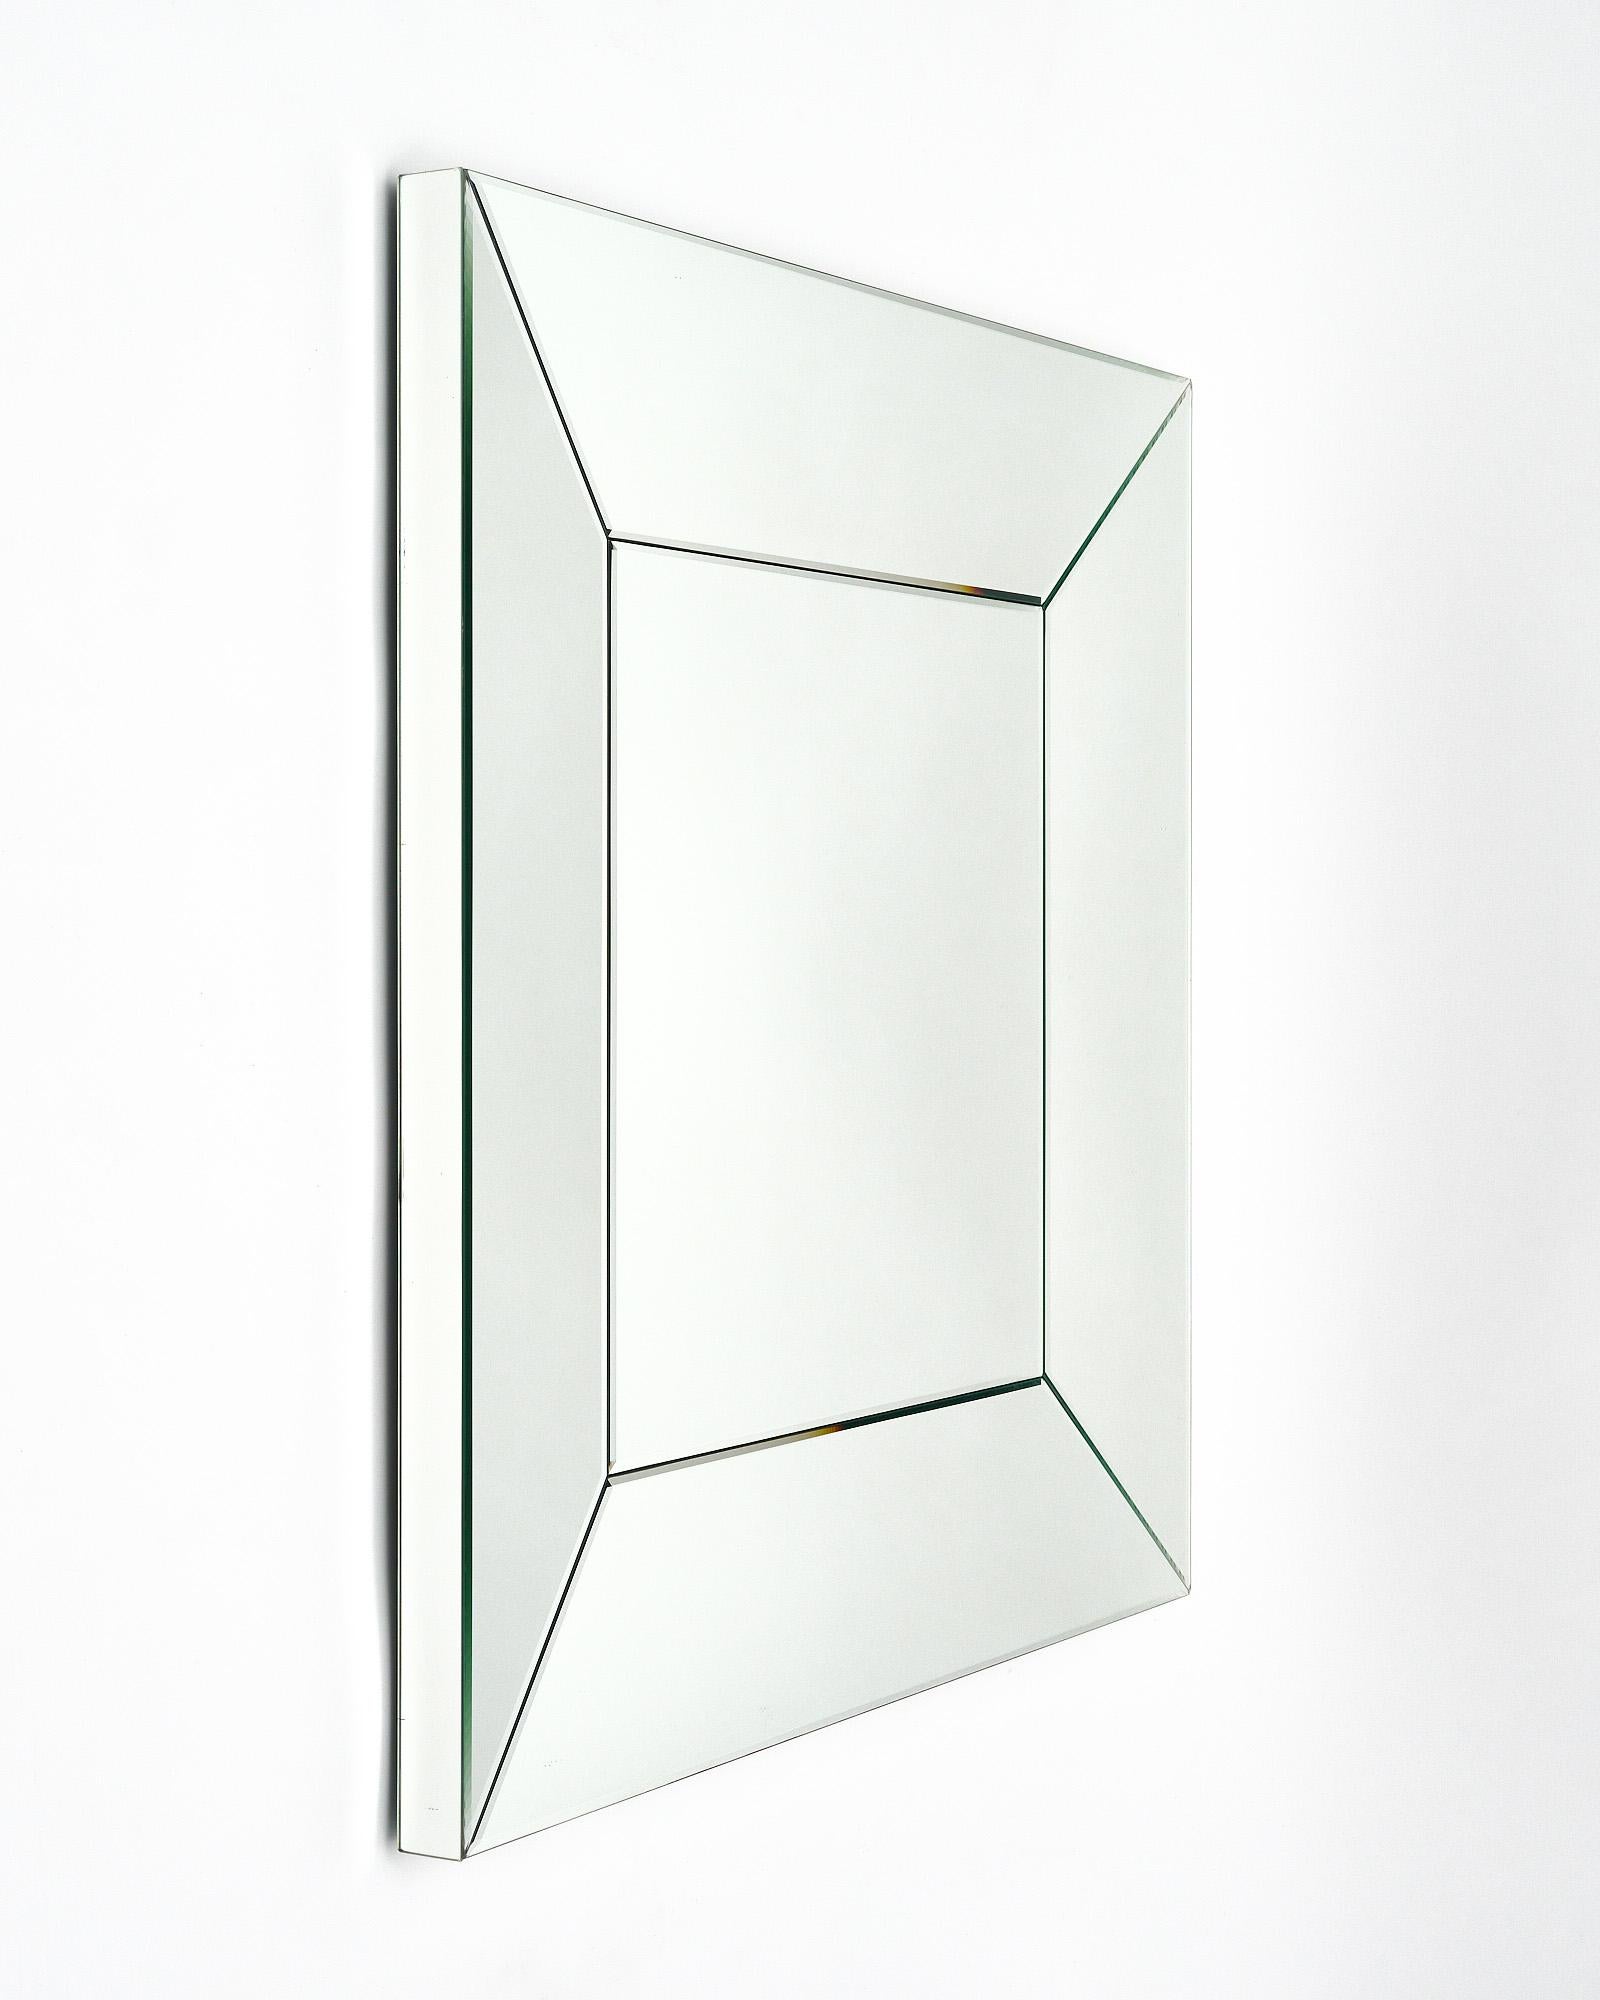 Mirror, French, in the Modernist style. The four beveled glass panels form the frame of this bold modernist mirror.
